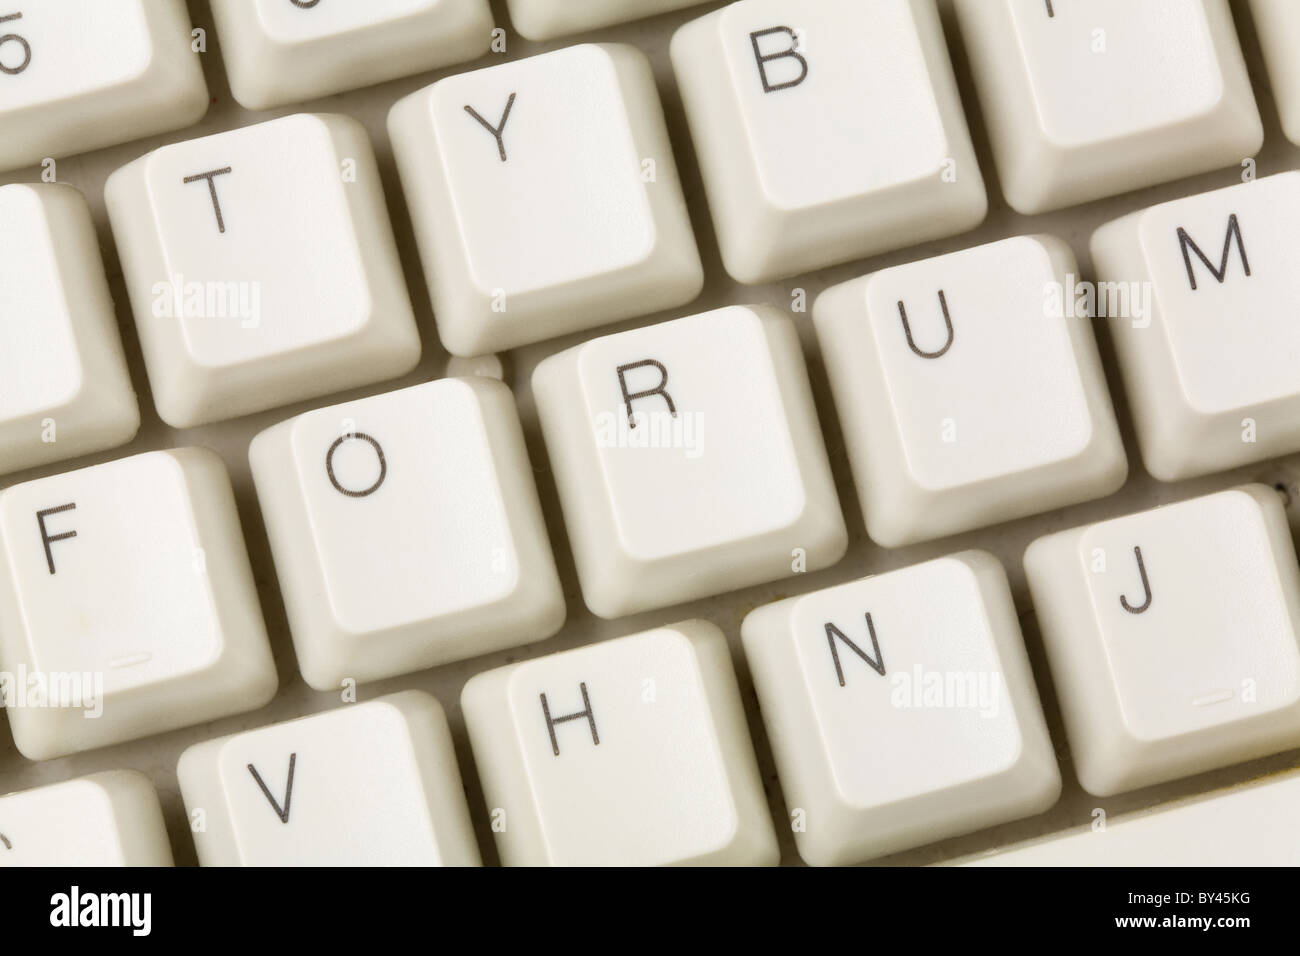 Forum and computer keyboard, internet discussion concept Stock Photo